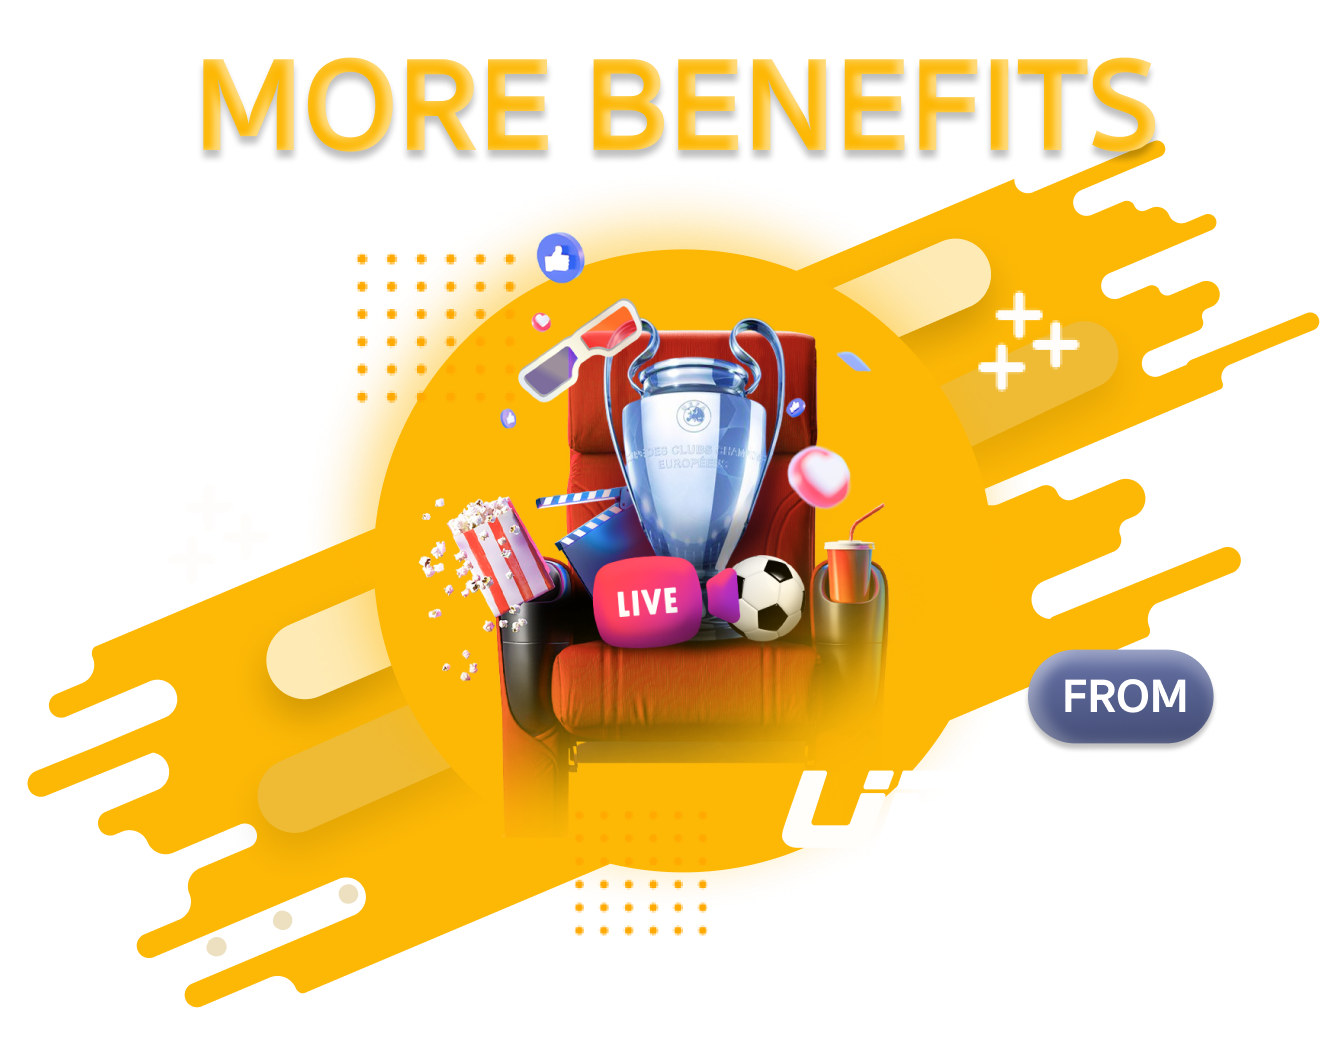 Many special benefits only for Ubett  members.